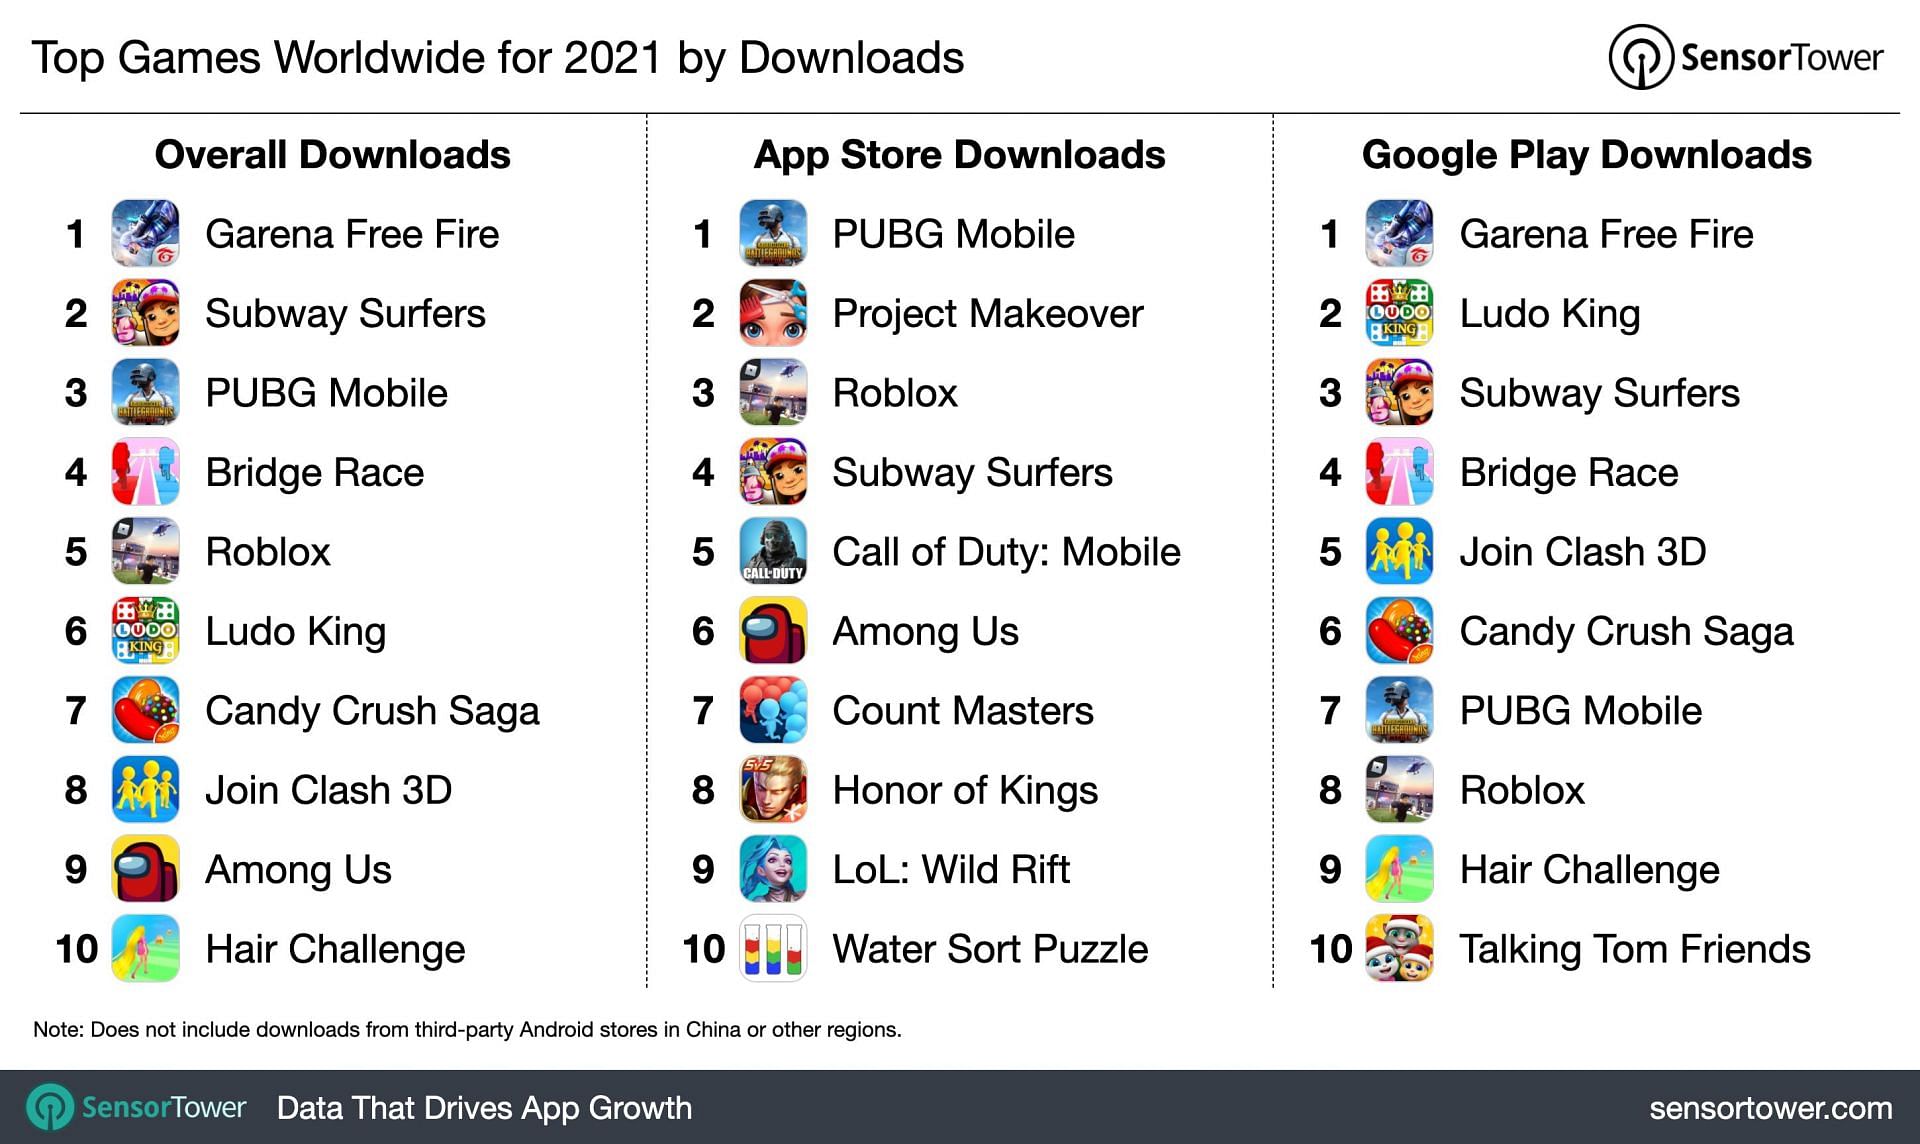 Top mobile games worldwide for 2021 by downloads (Image via Sensor Tower)